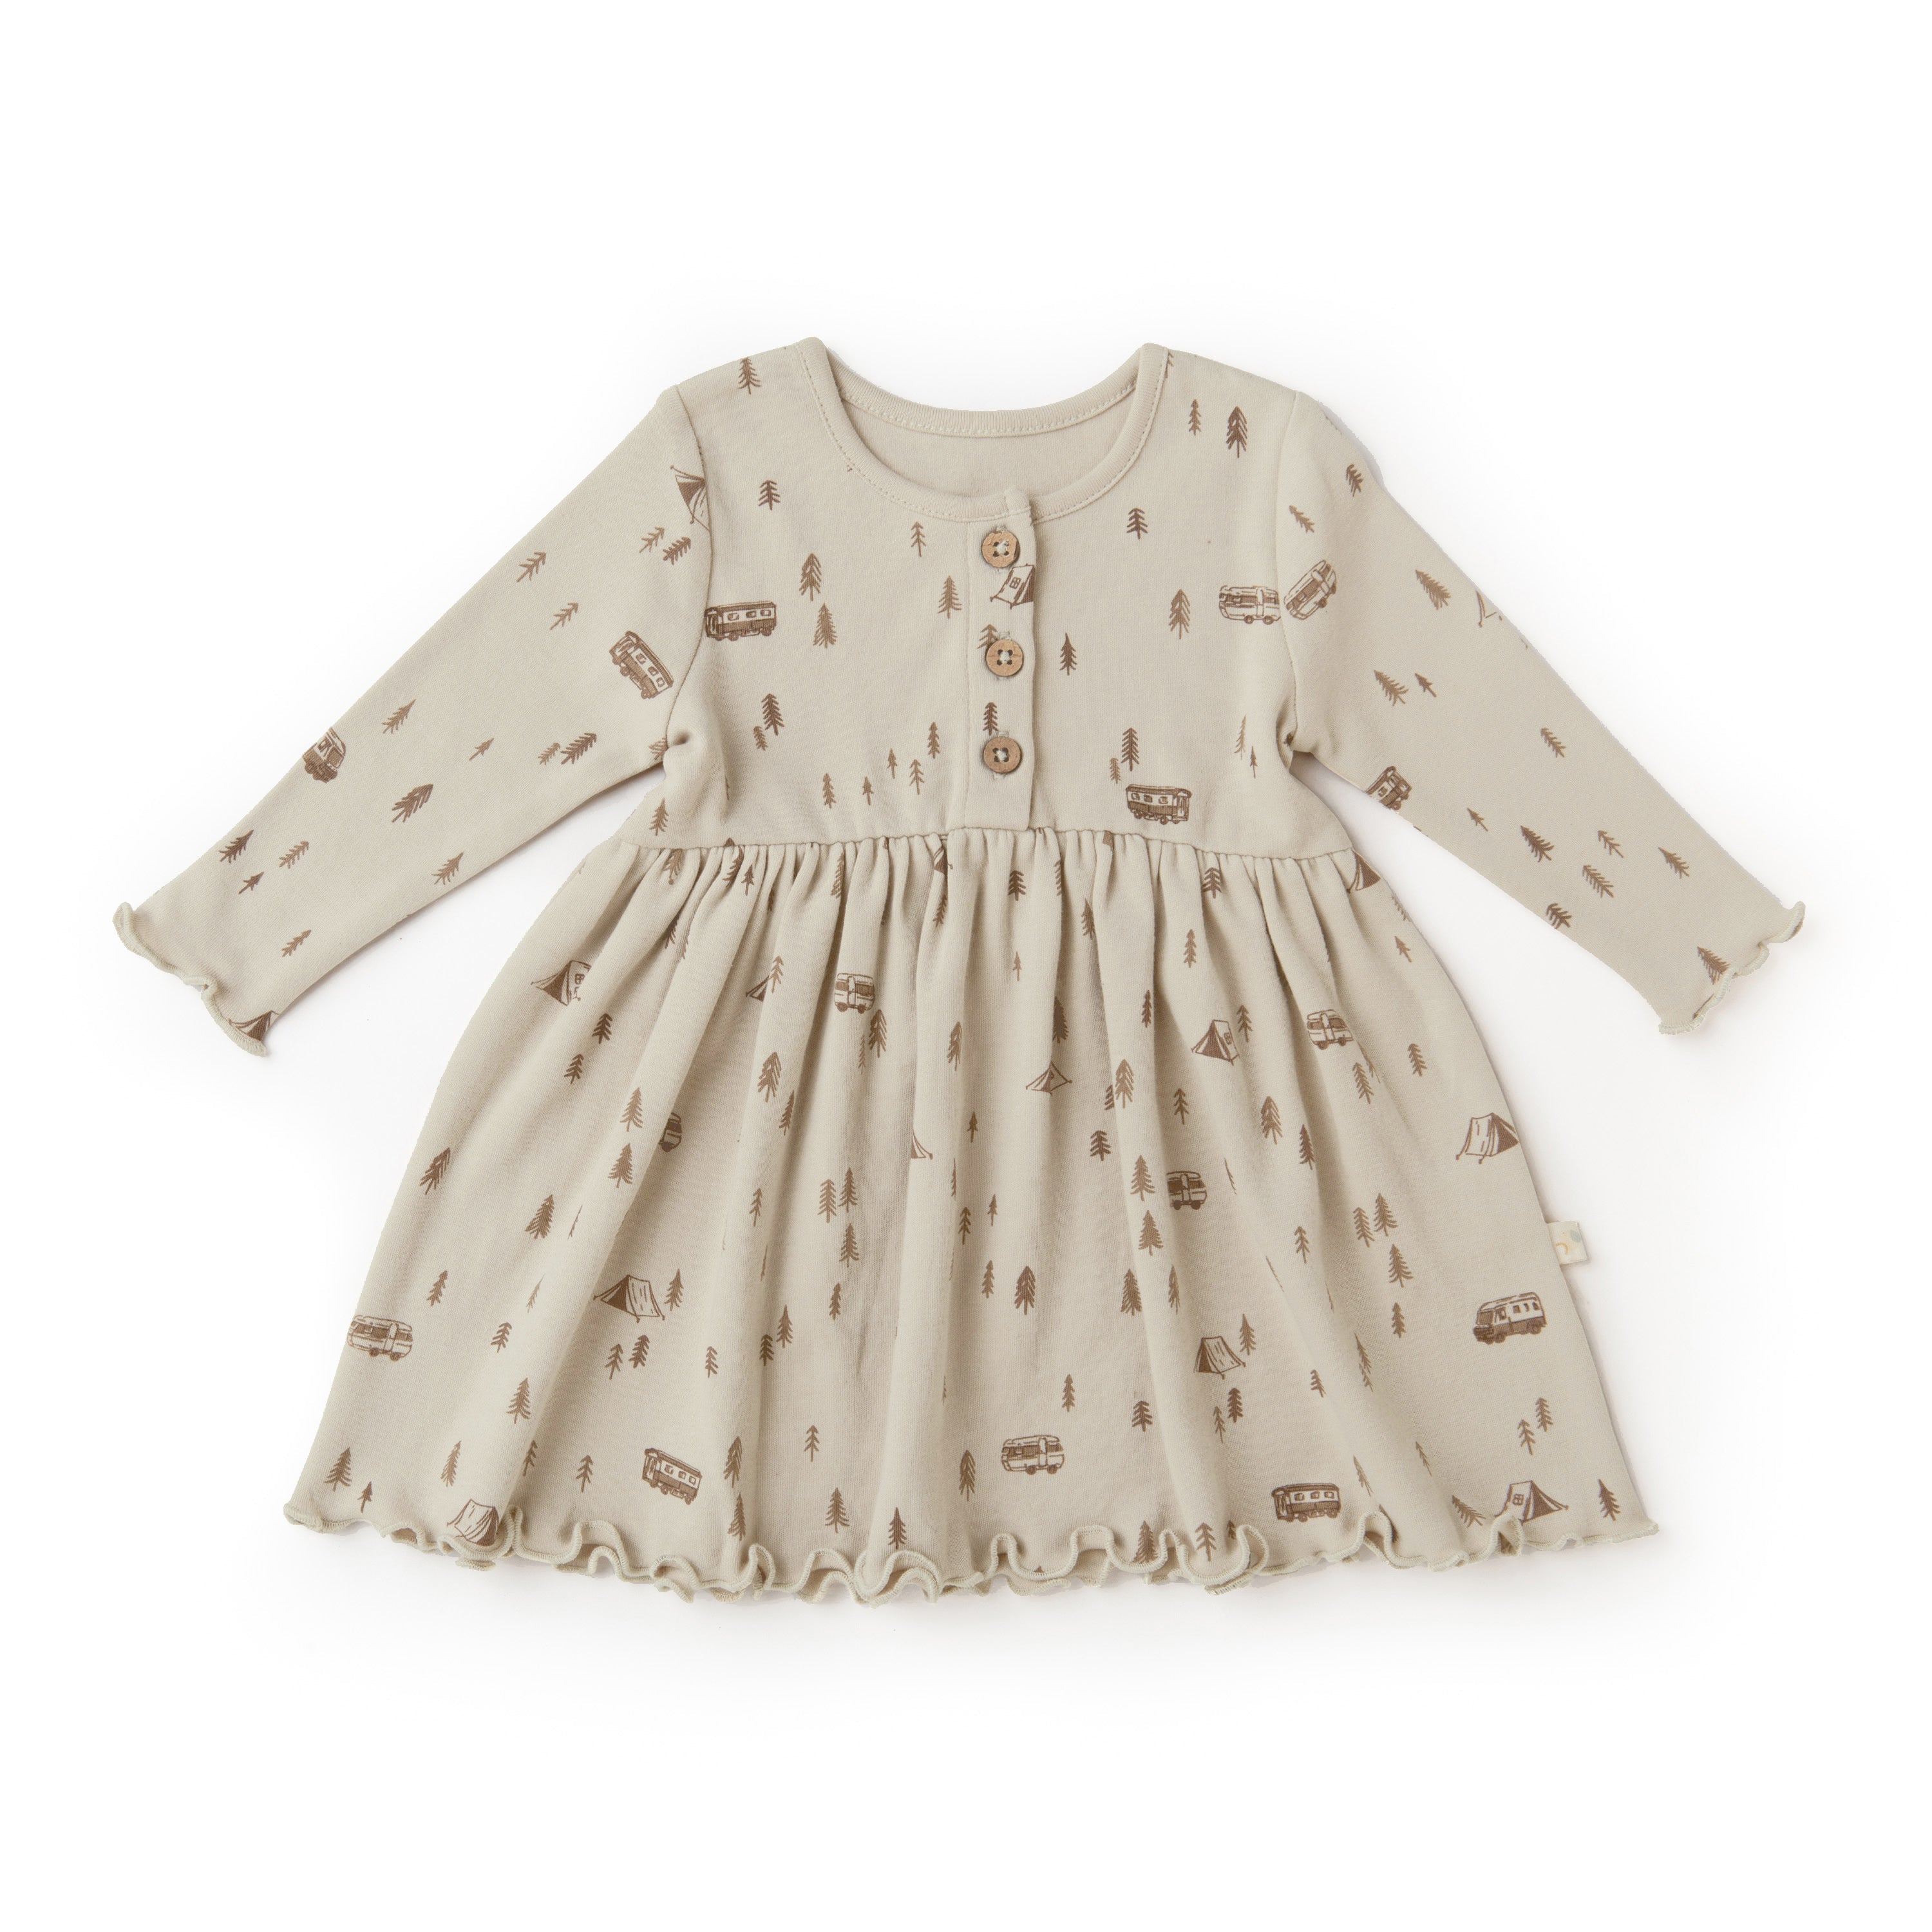 A beige Organic Long Sleeve Twirl Dress - Camplife from Organic Baby with long sleeves, featuring a pattern of small vintage keys and locks, laid flat on a white background. The dress has a flared skirt and button